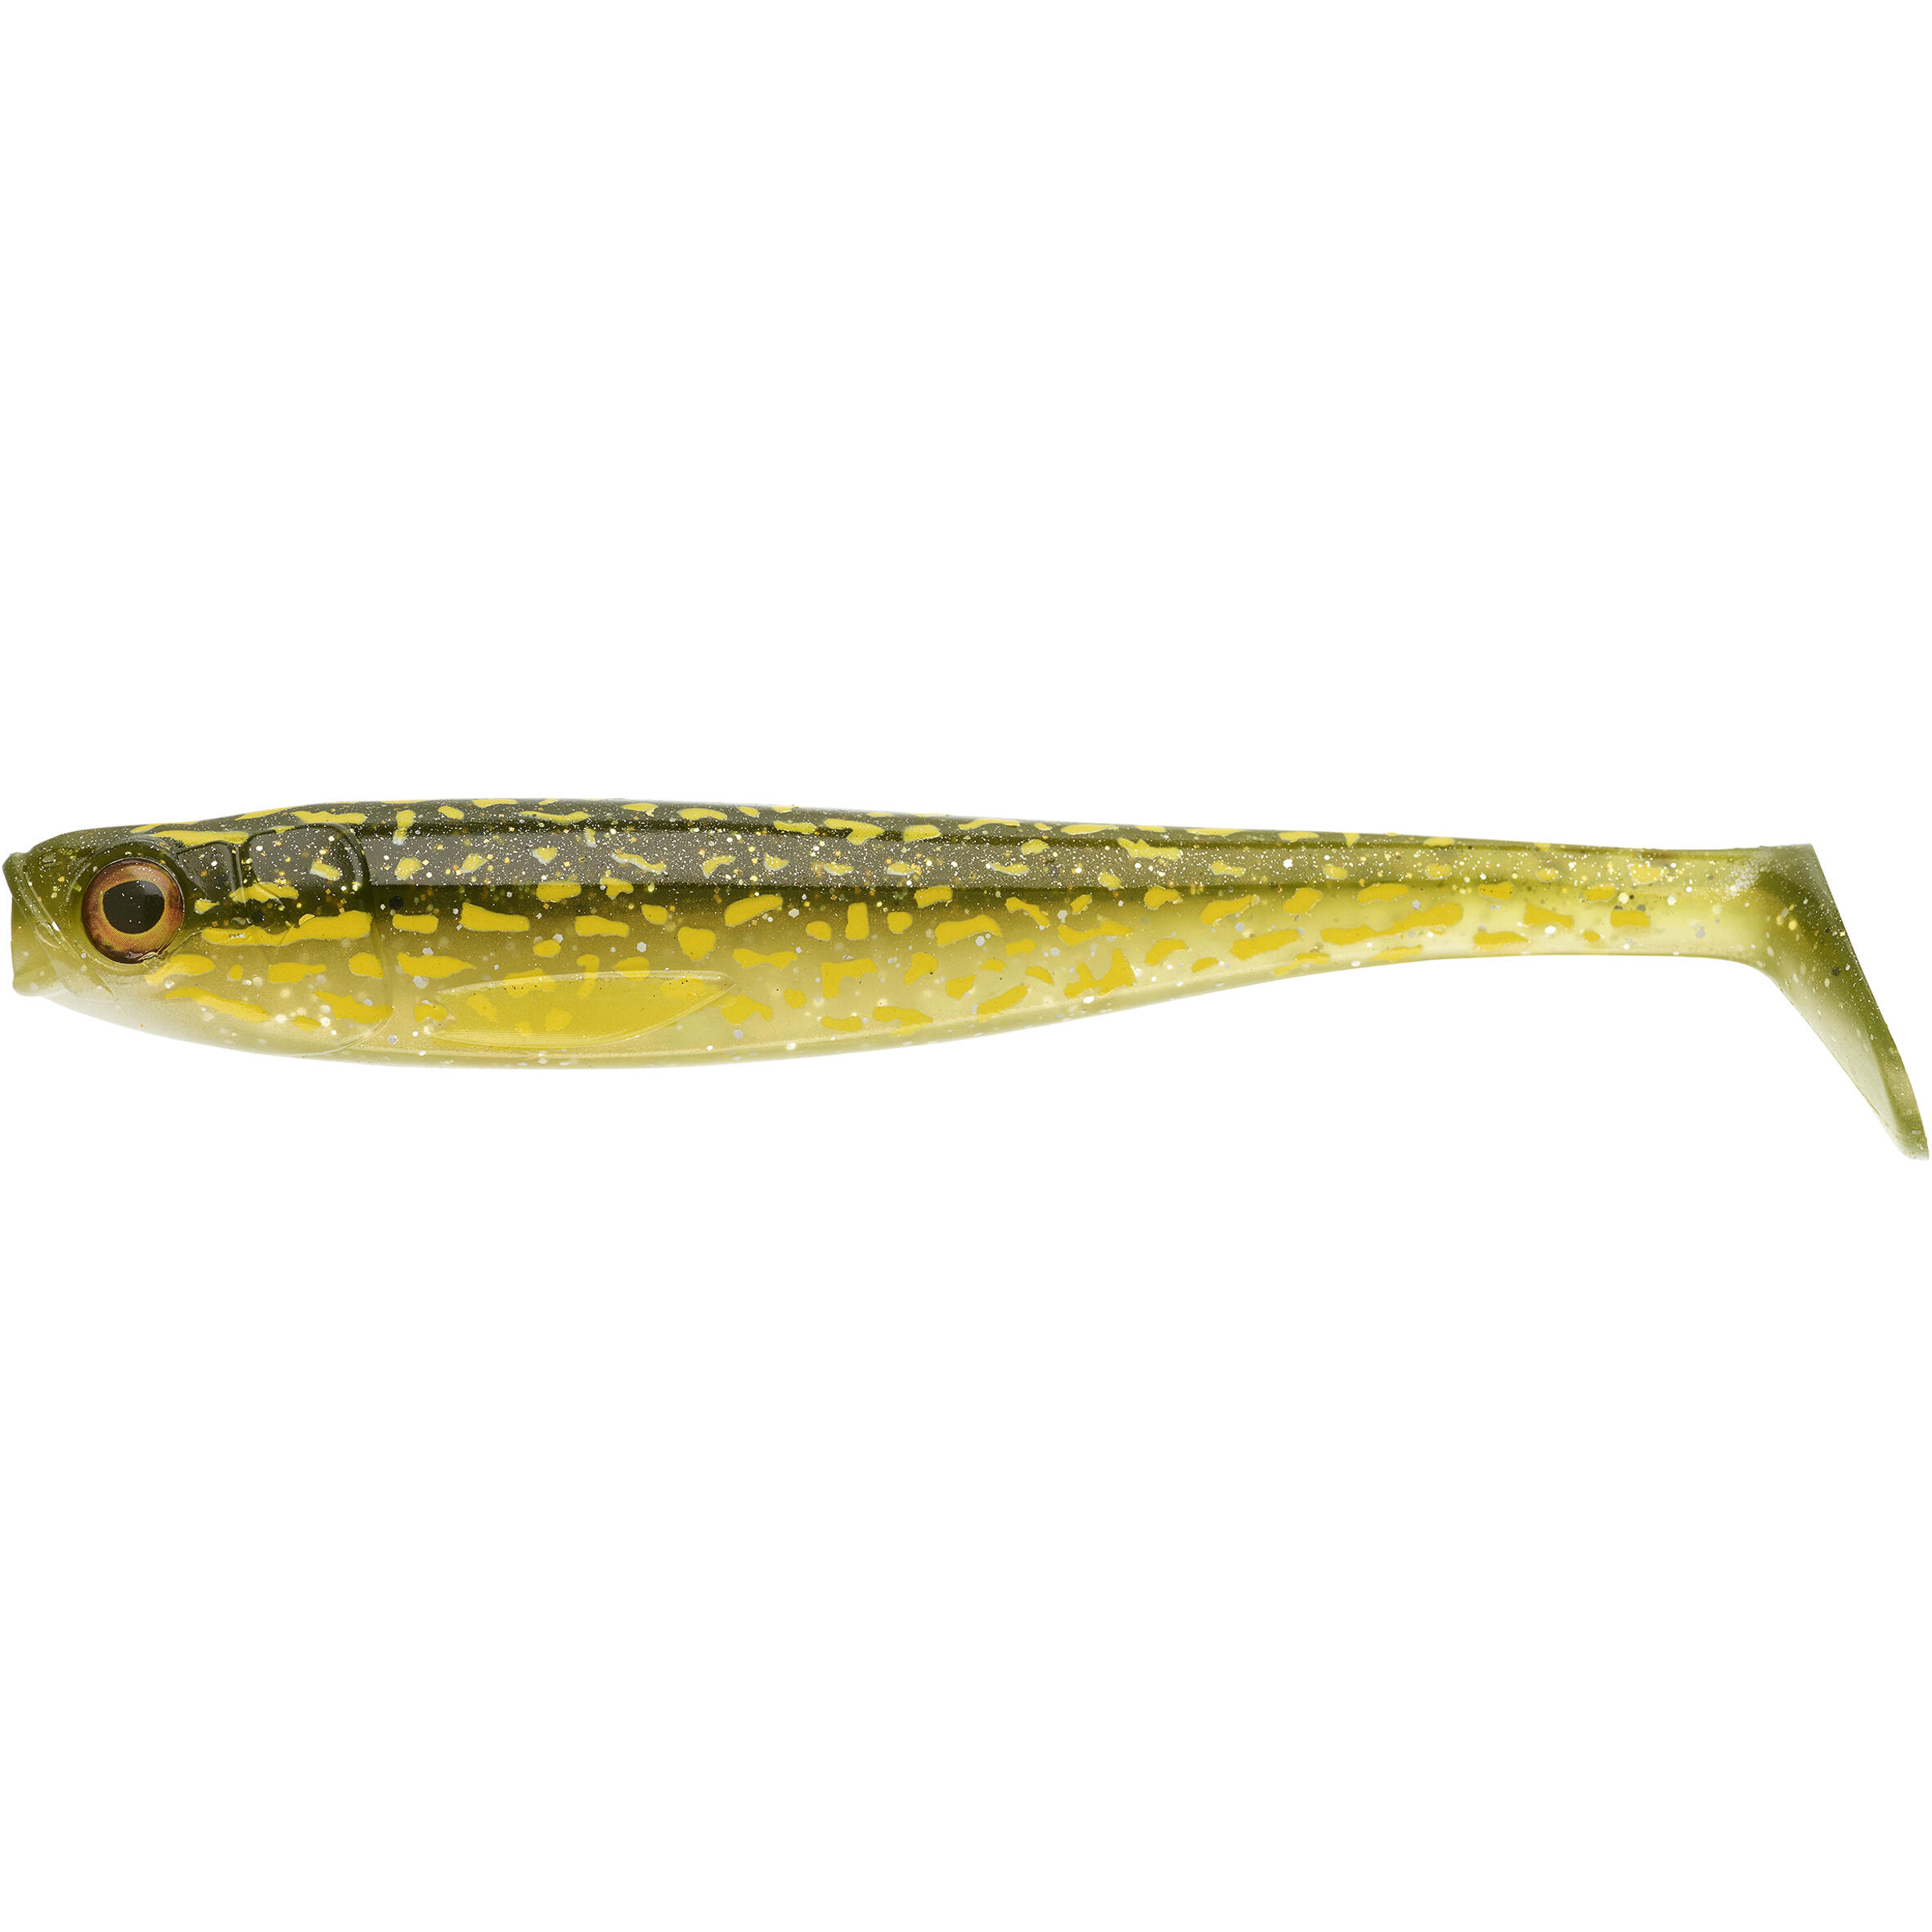 CAPERLAN ROGEN SOFT SHAD PIKE LURE 200 PIKE X1